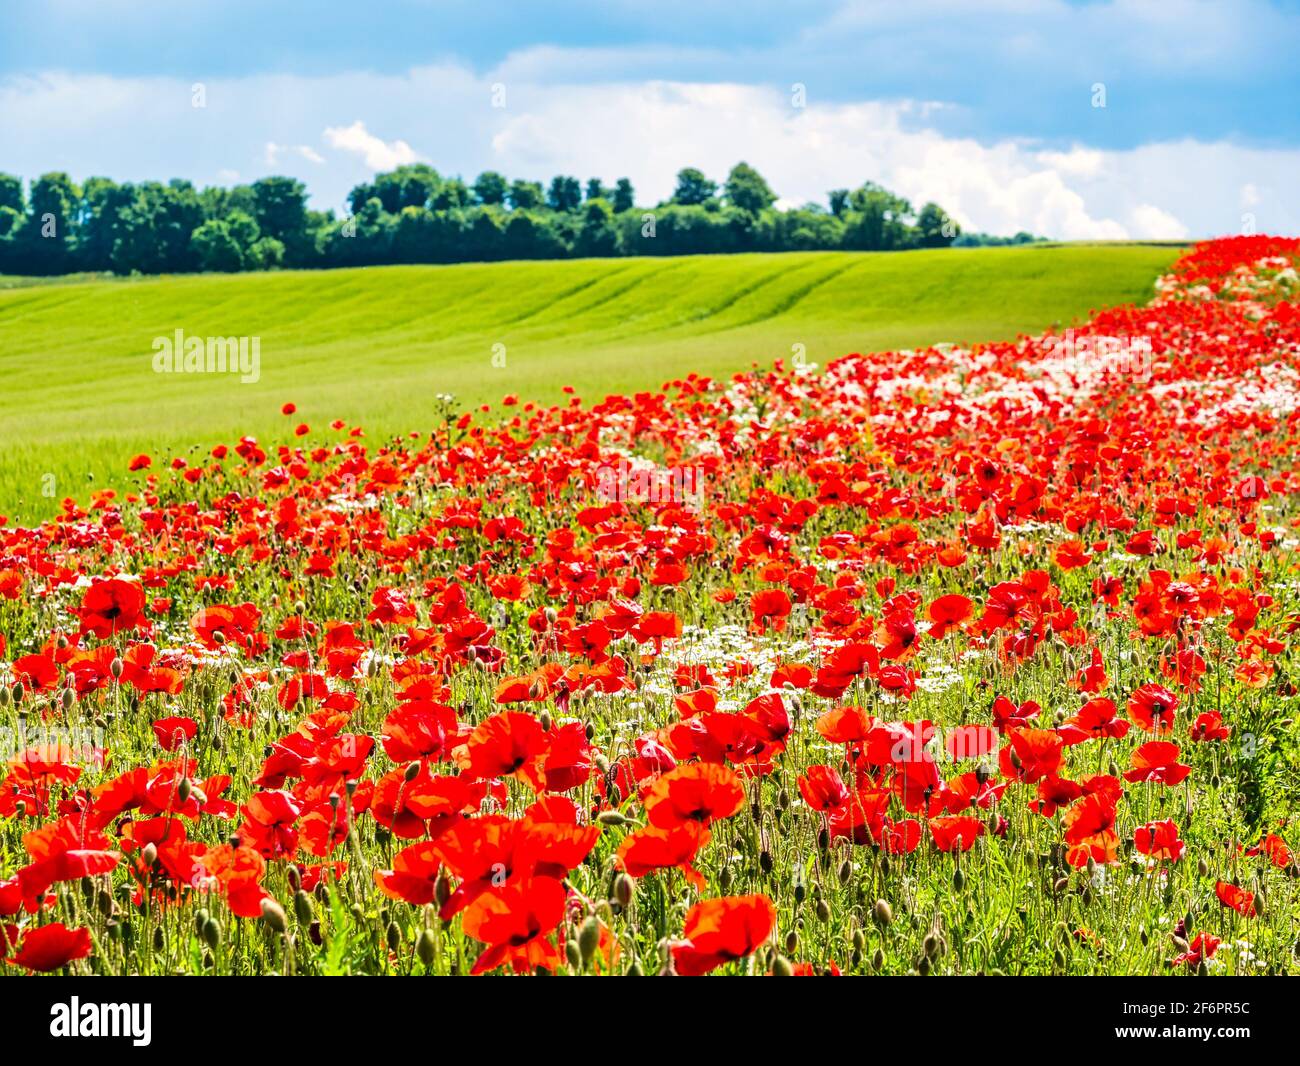 Colourful field of wild red poppies growing next to crop field in sunshine, East Lothian, Scotland, UK Stock Photo